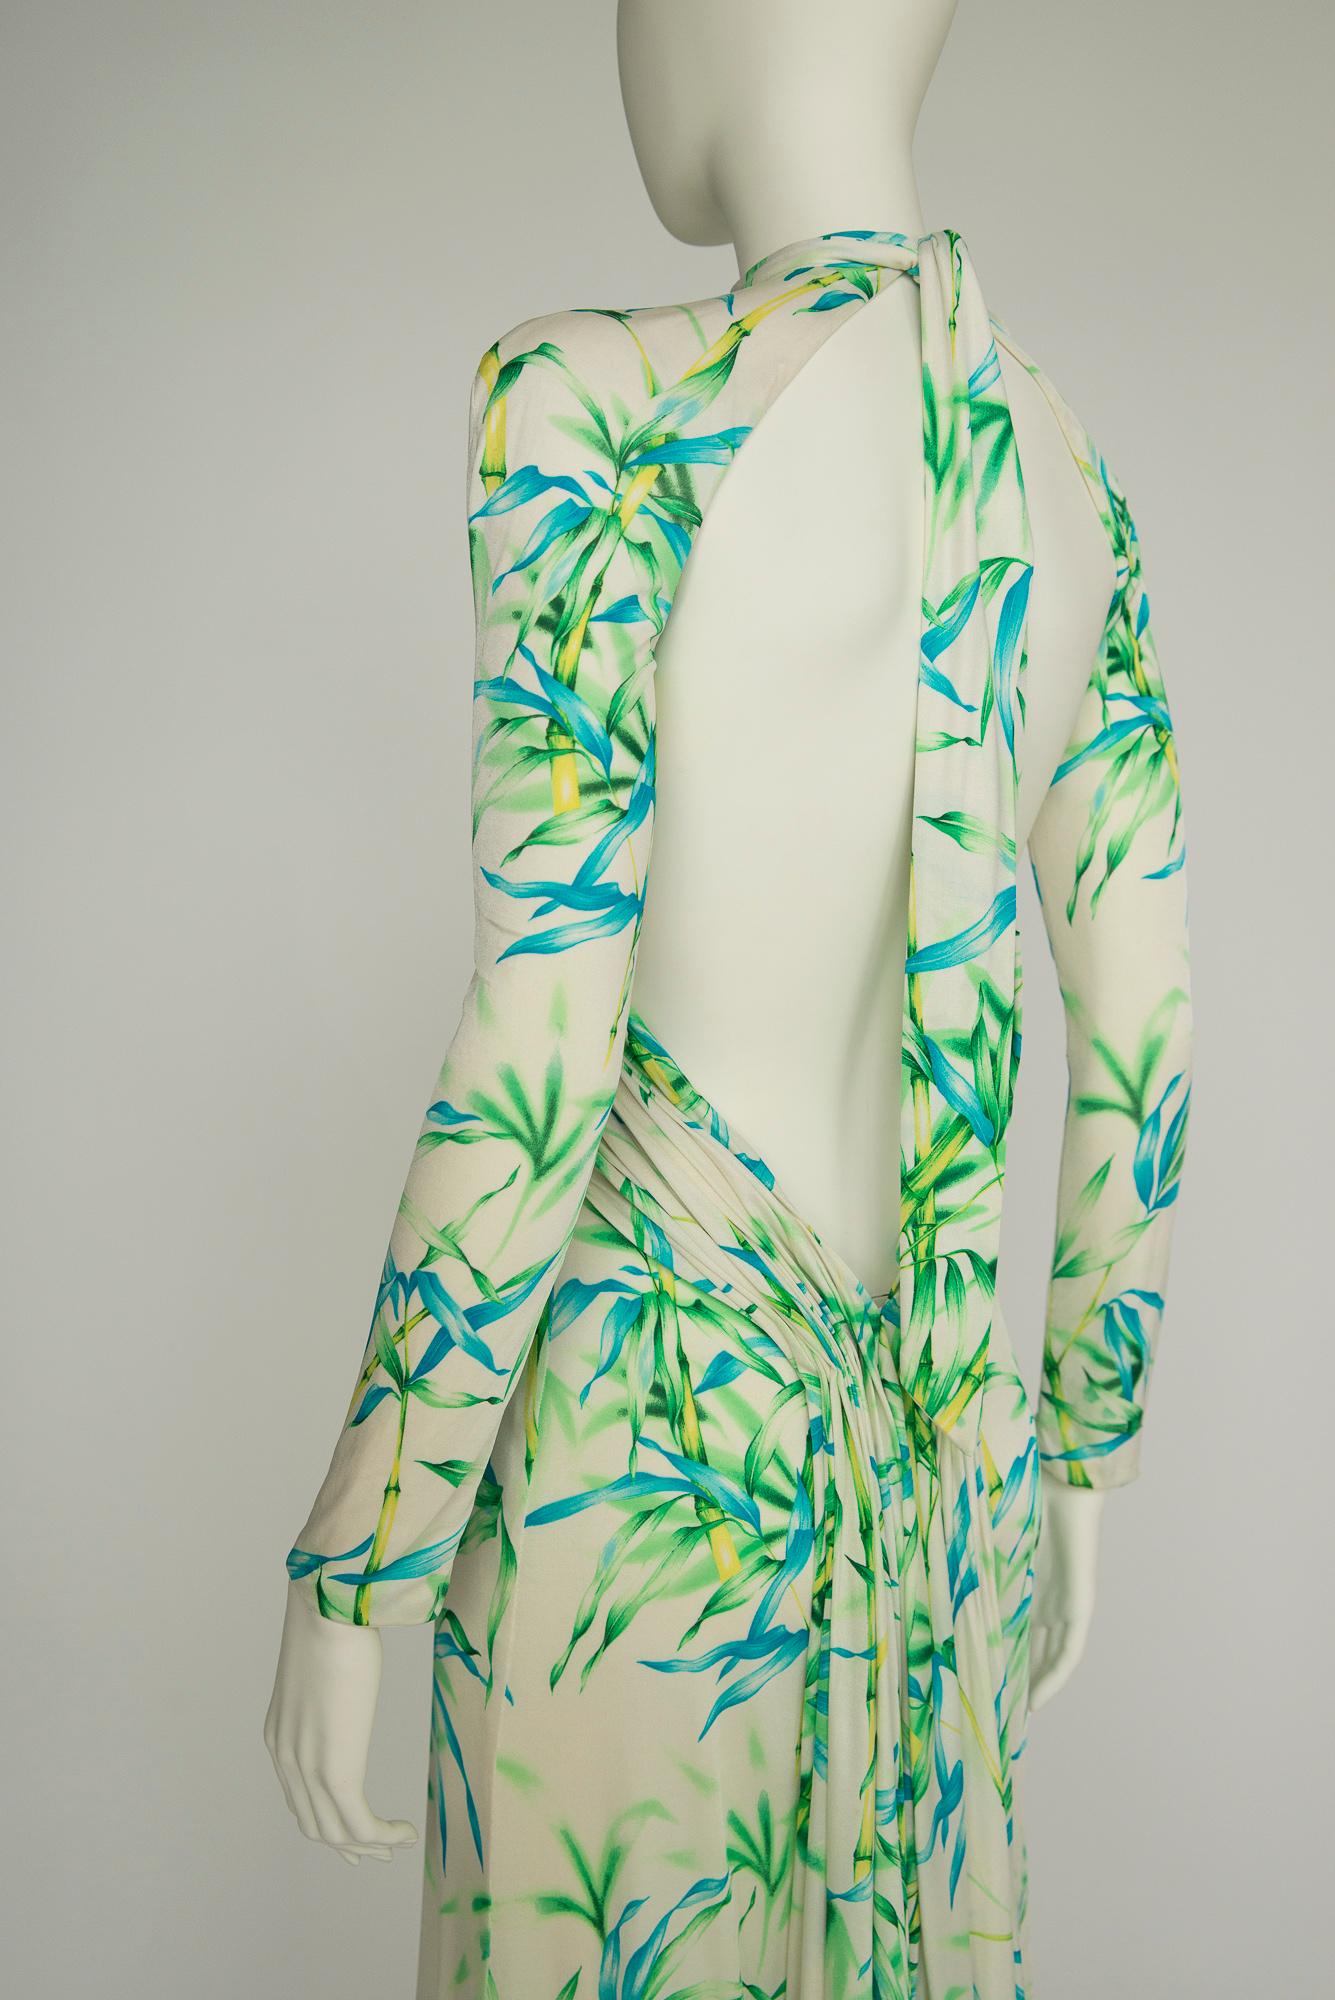 Gianni Versace Couture Open-Back Tropical Print Runway Silk Jersey Dress, SS2000 For Sale 10